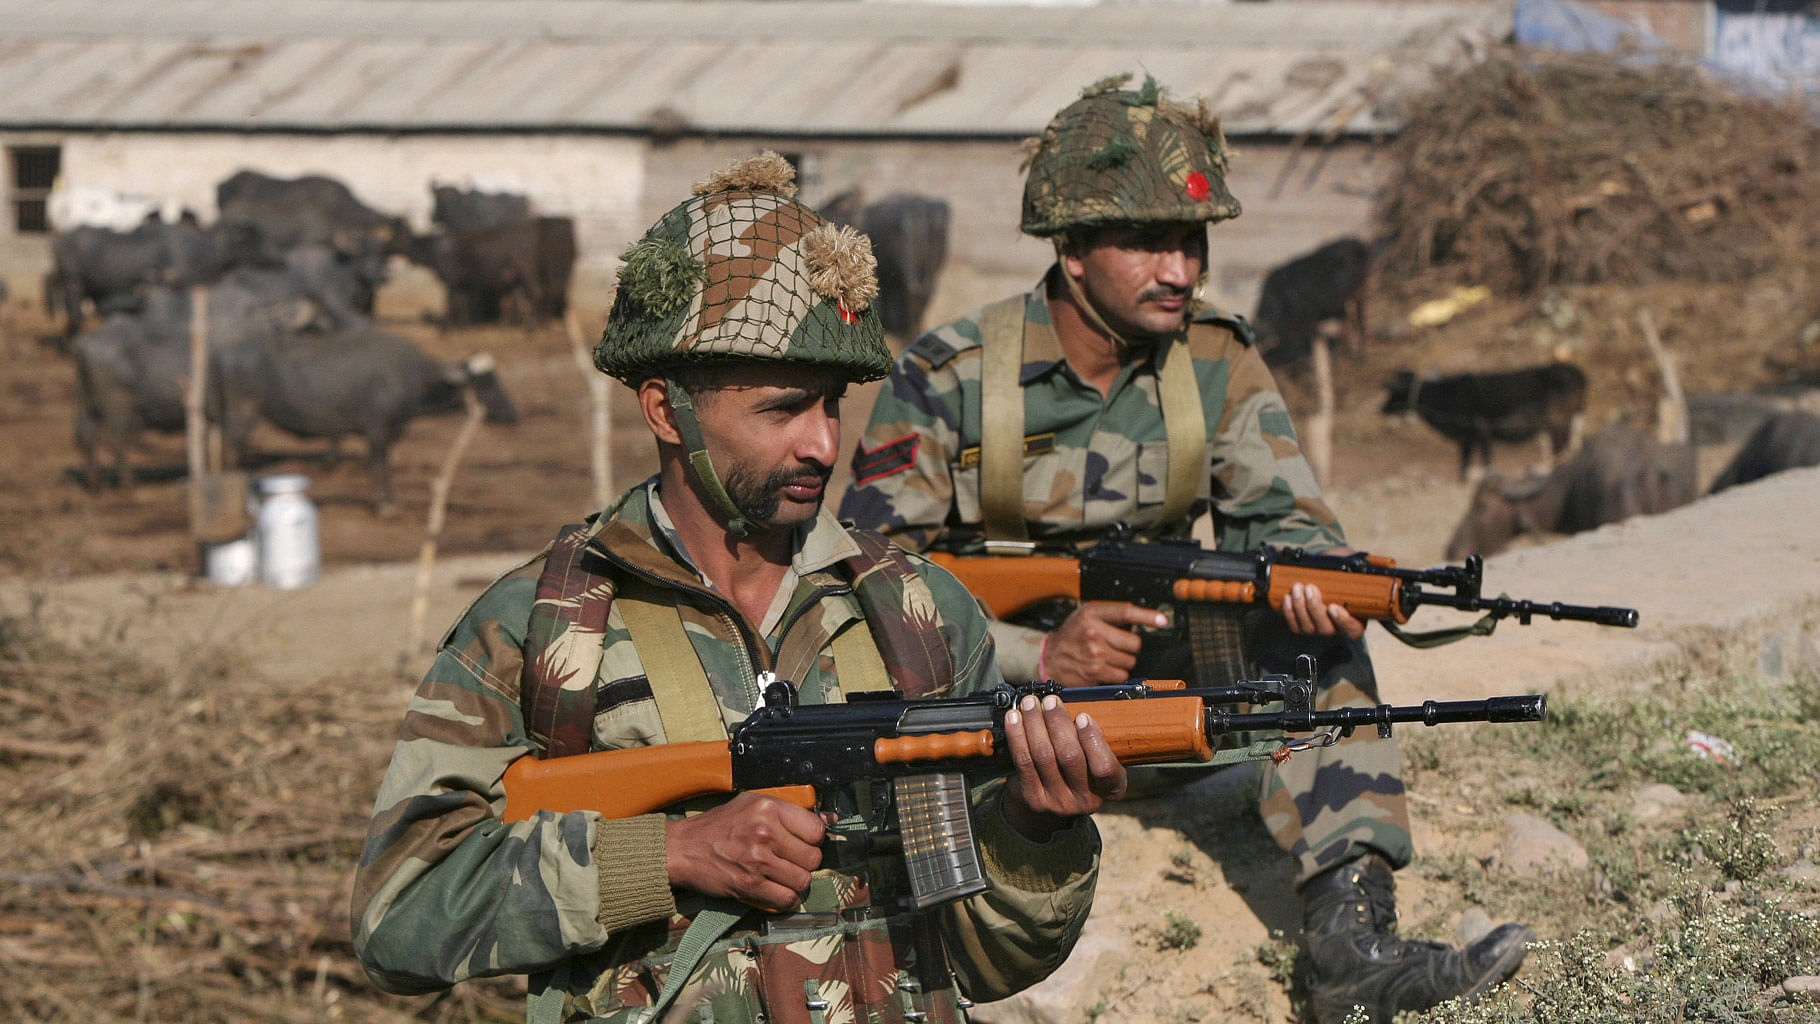 File photo of soldiers standing guard near the Indian Air Force (IAF) base at Pathankot. (Photo: Reuters)